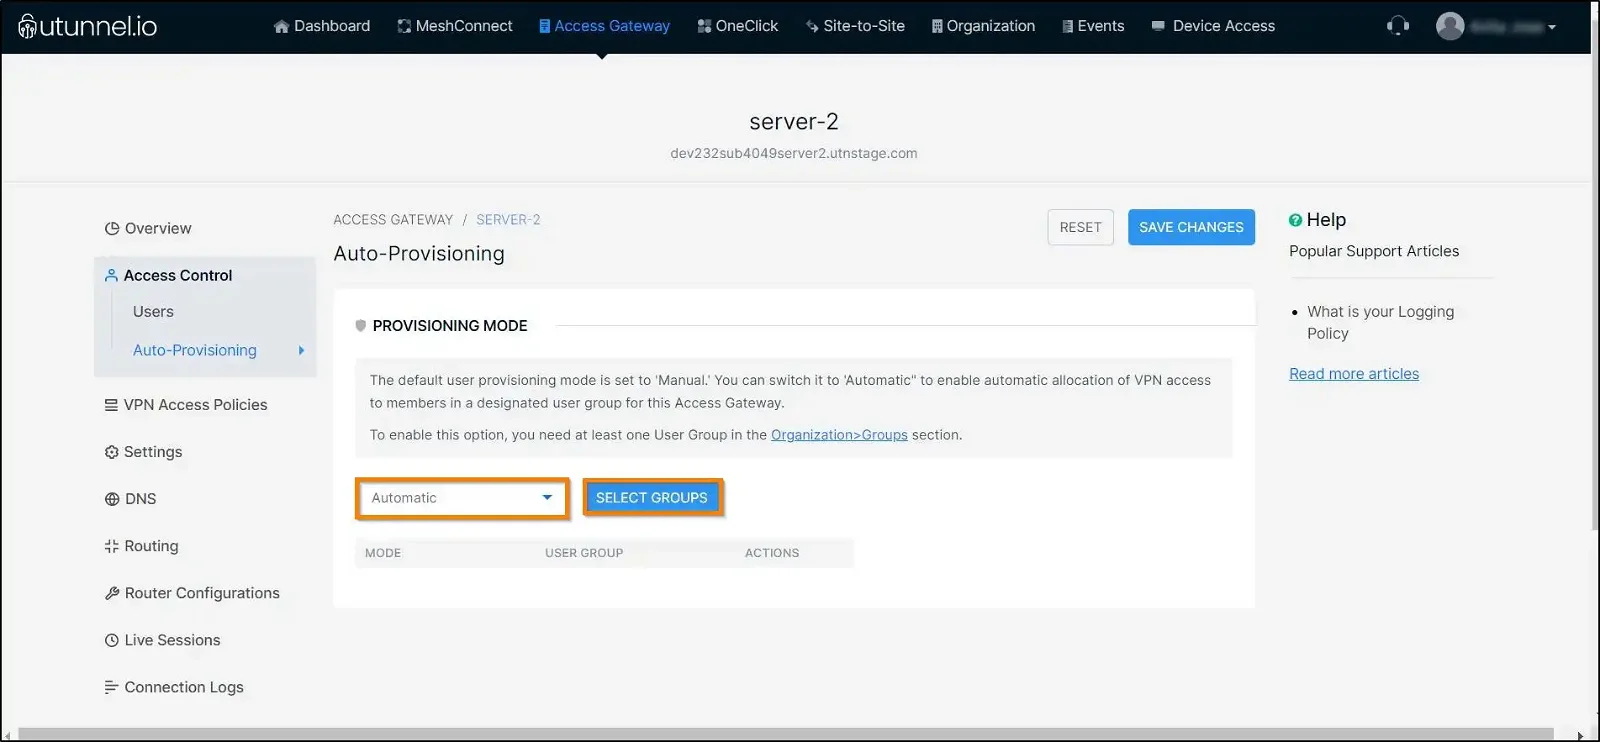 How to enable user provisioning on a server tab